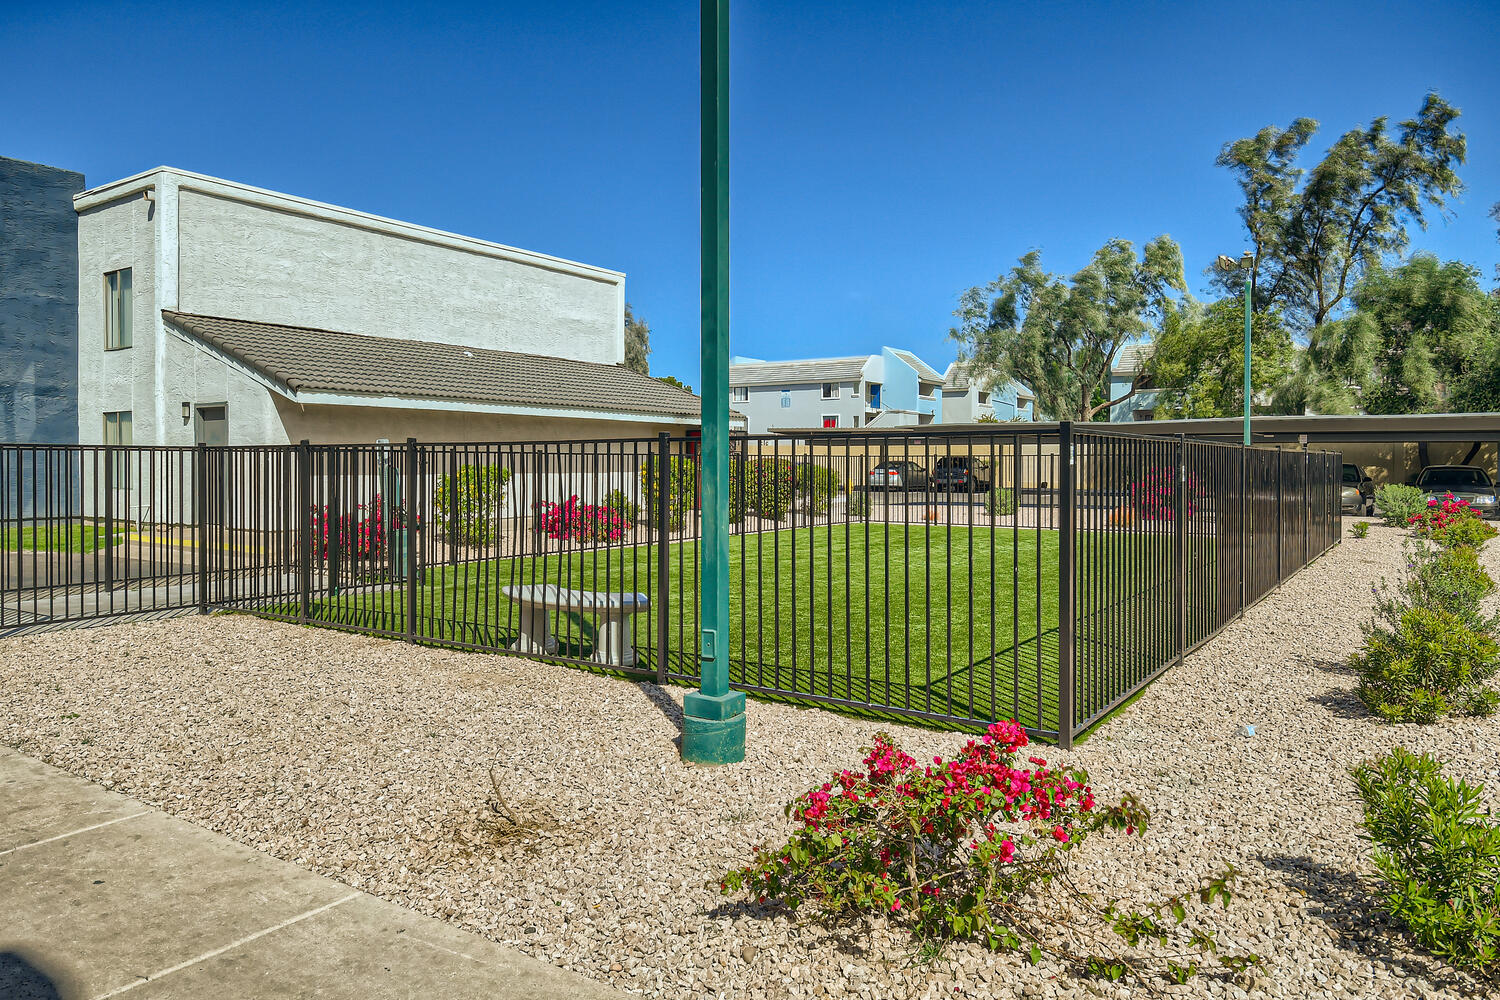 Glendale, AZ apartments with a fence in front of a building and grass